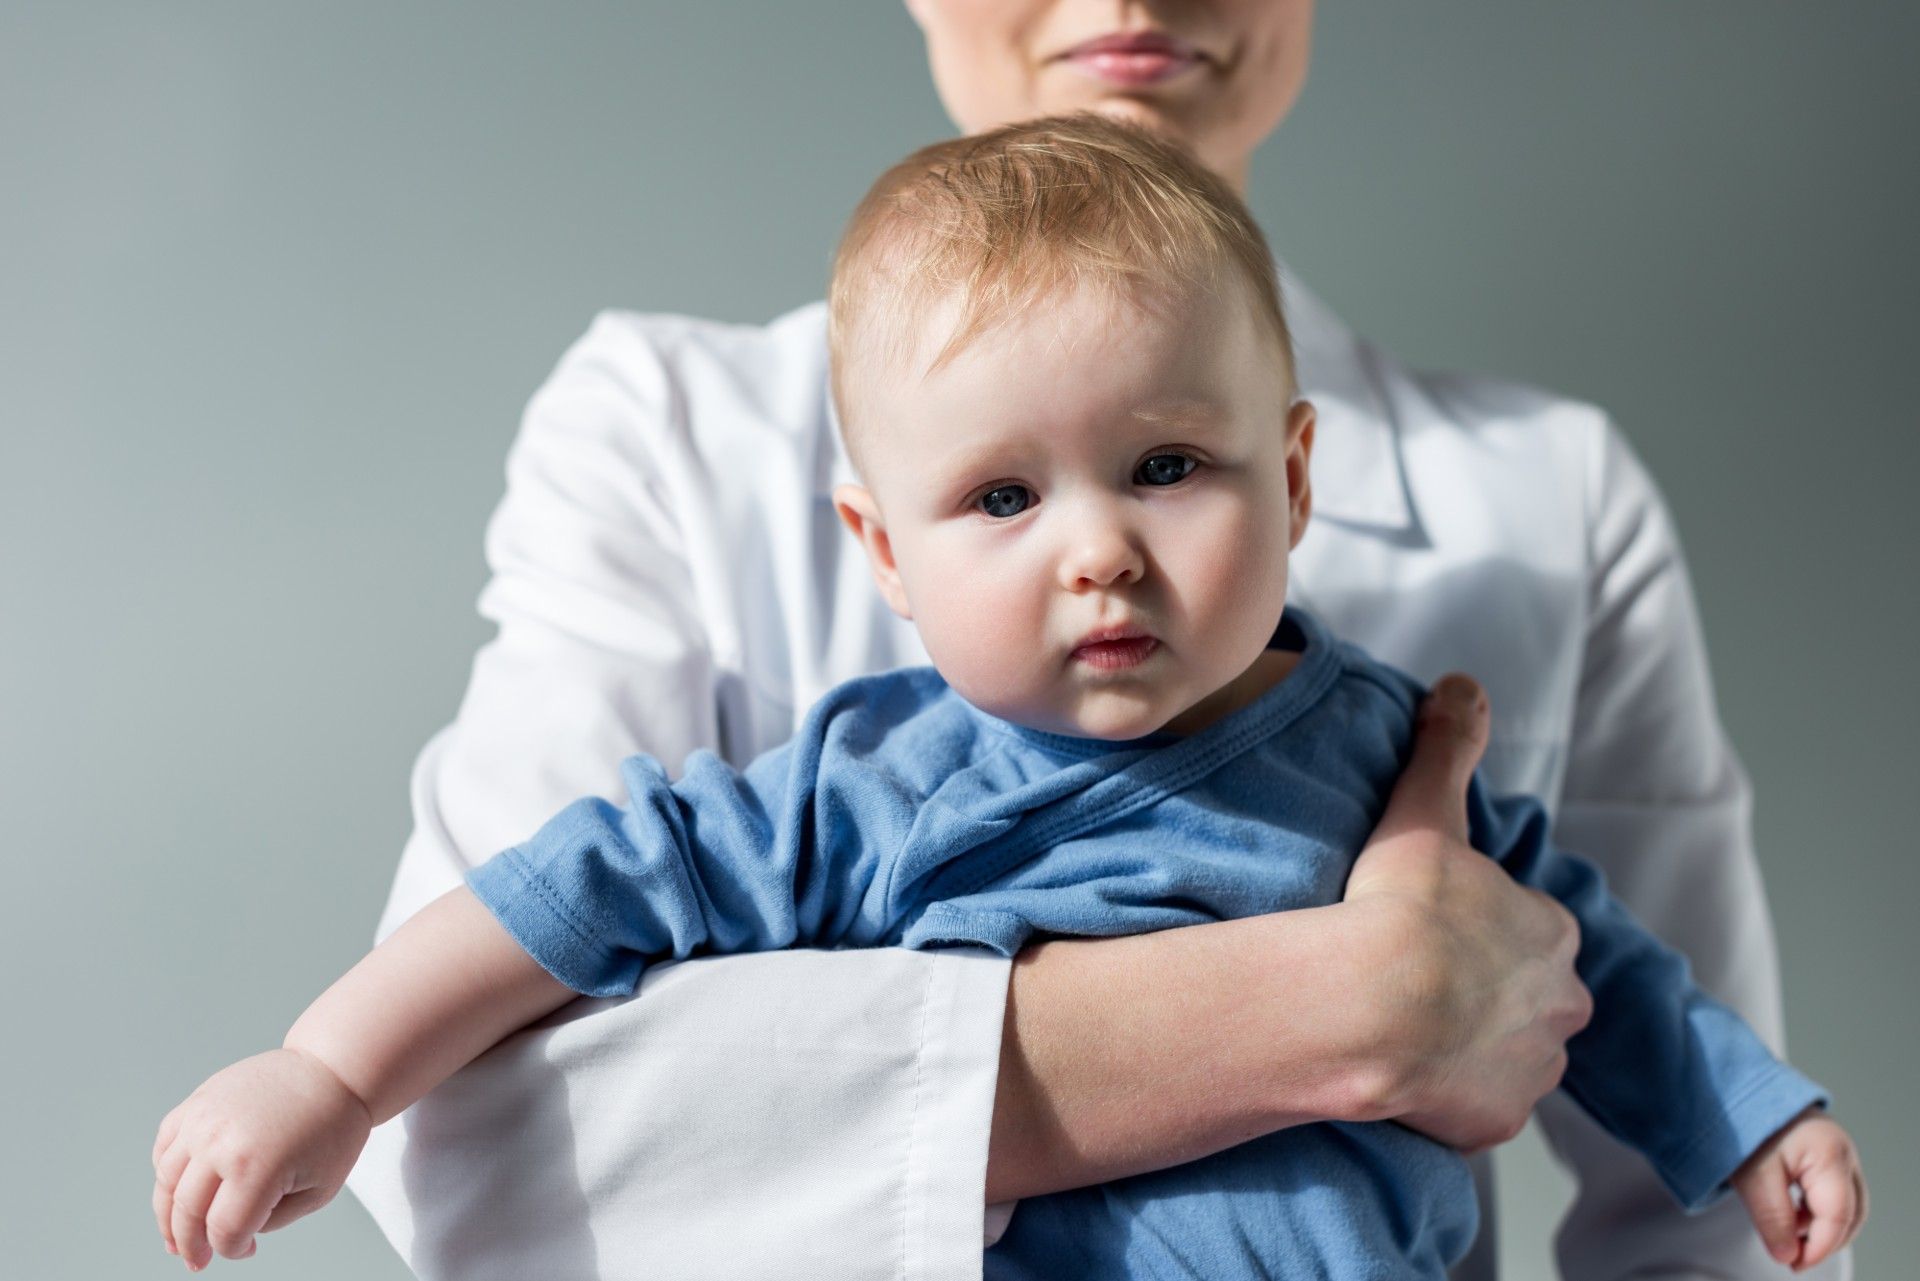 Woman in white lab coat holding a baby in a blue onesie